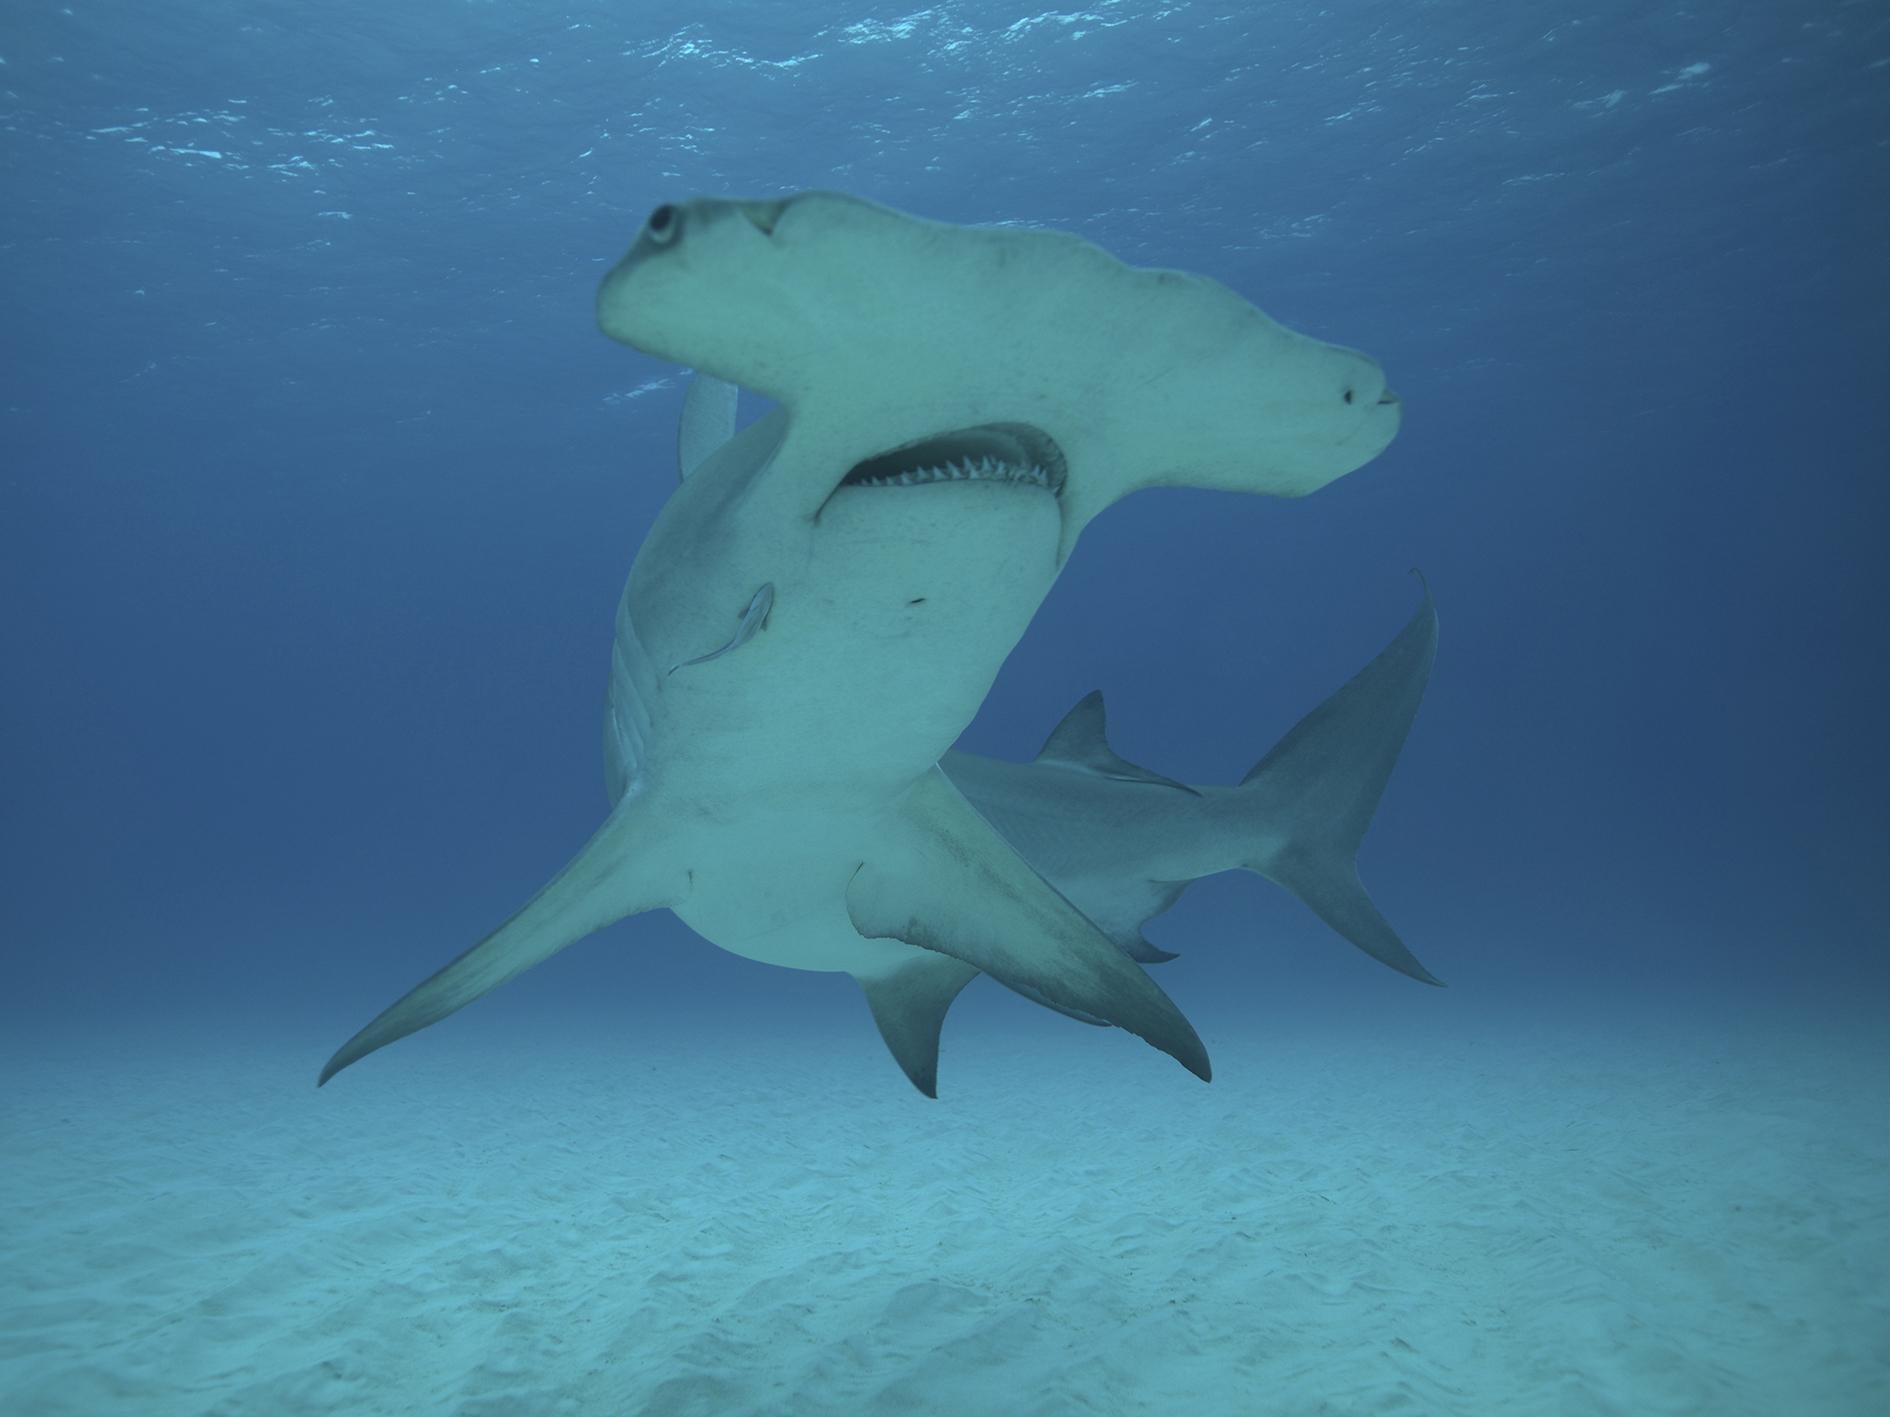 Great hammerheads are normally found in the Mediterranean and around southern Spain and Portugal, but shark tracking expert has predicted they will be regularly seen in UK waters in coming years